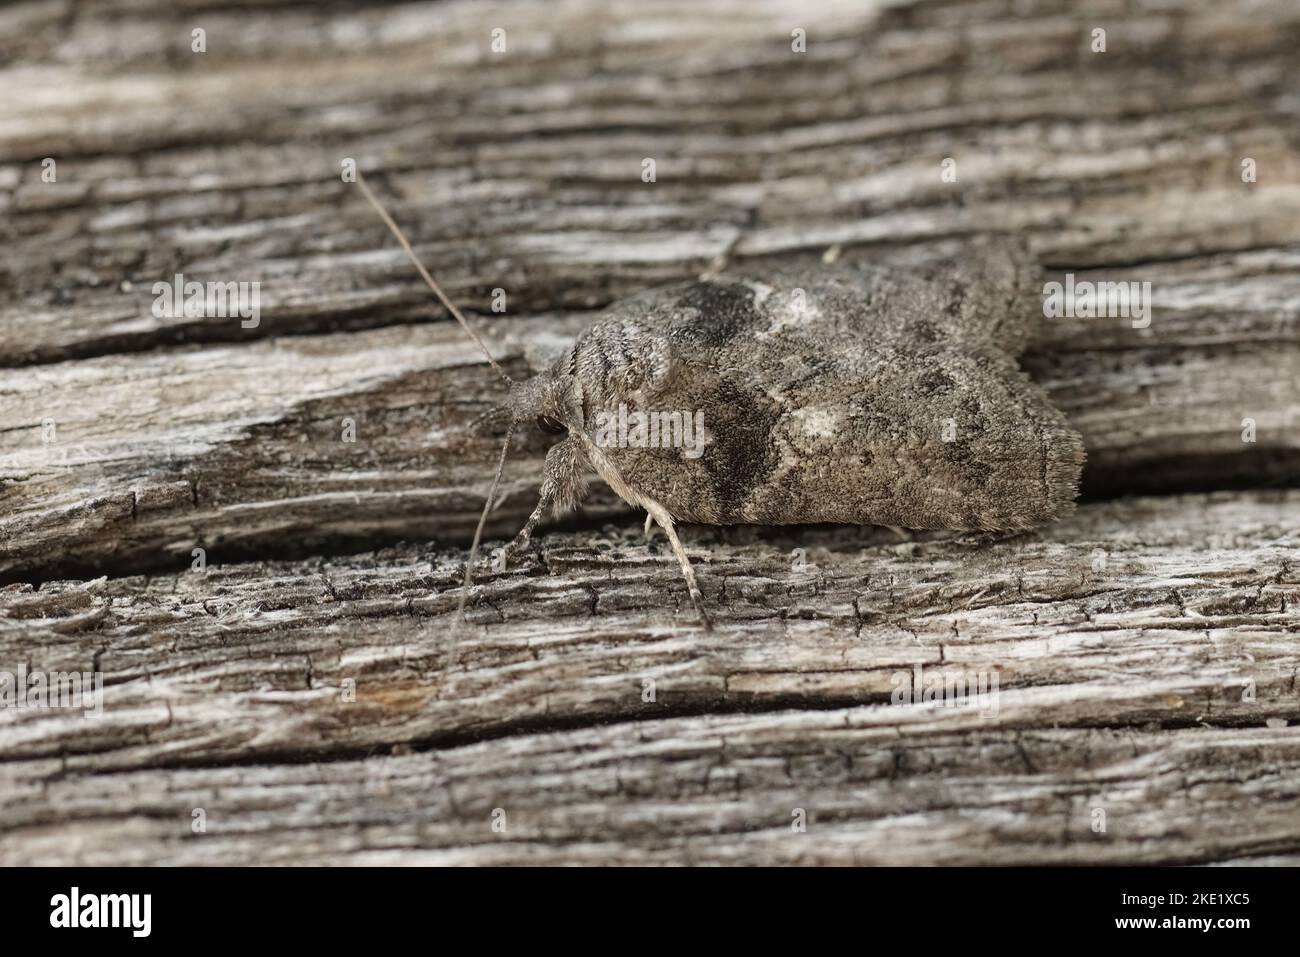 A closeup of gray Nycteola moth camouflaged on wooden surface Stock Photo